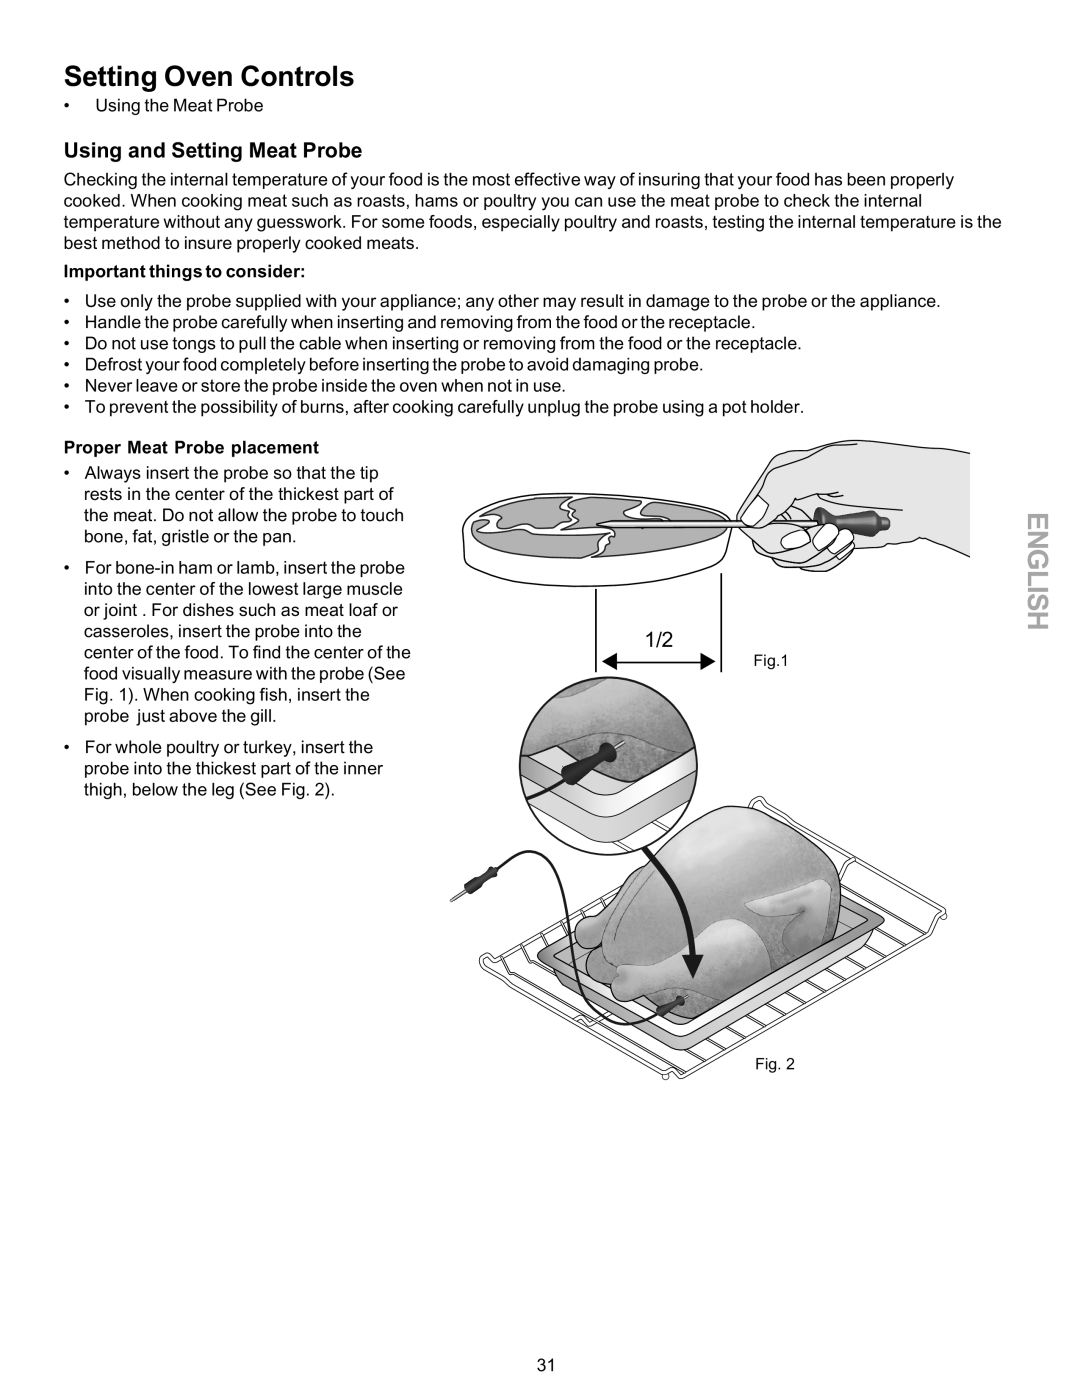 Kenmore 790-9663 manual Using and Setting Meat Probe, Important things to consider, Proper Meat Probe placement, English 